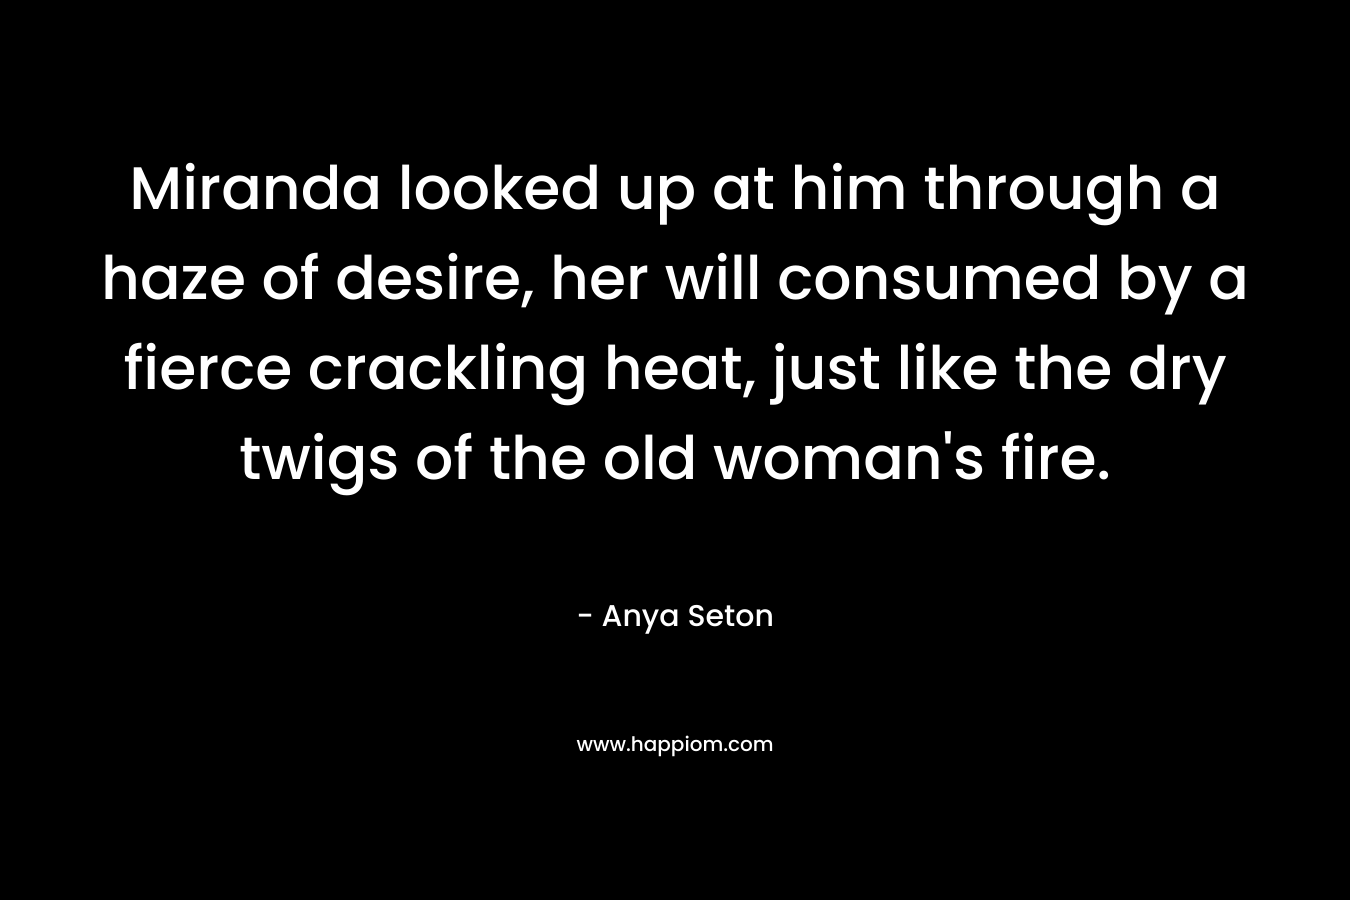 Miranda looked up at him through a haze of desire, her will consumed by a fierce crackling heat, just like the dry twigs of the old woman’s fire. – Anya Seton